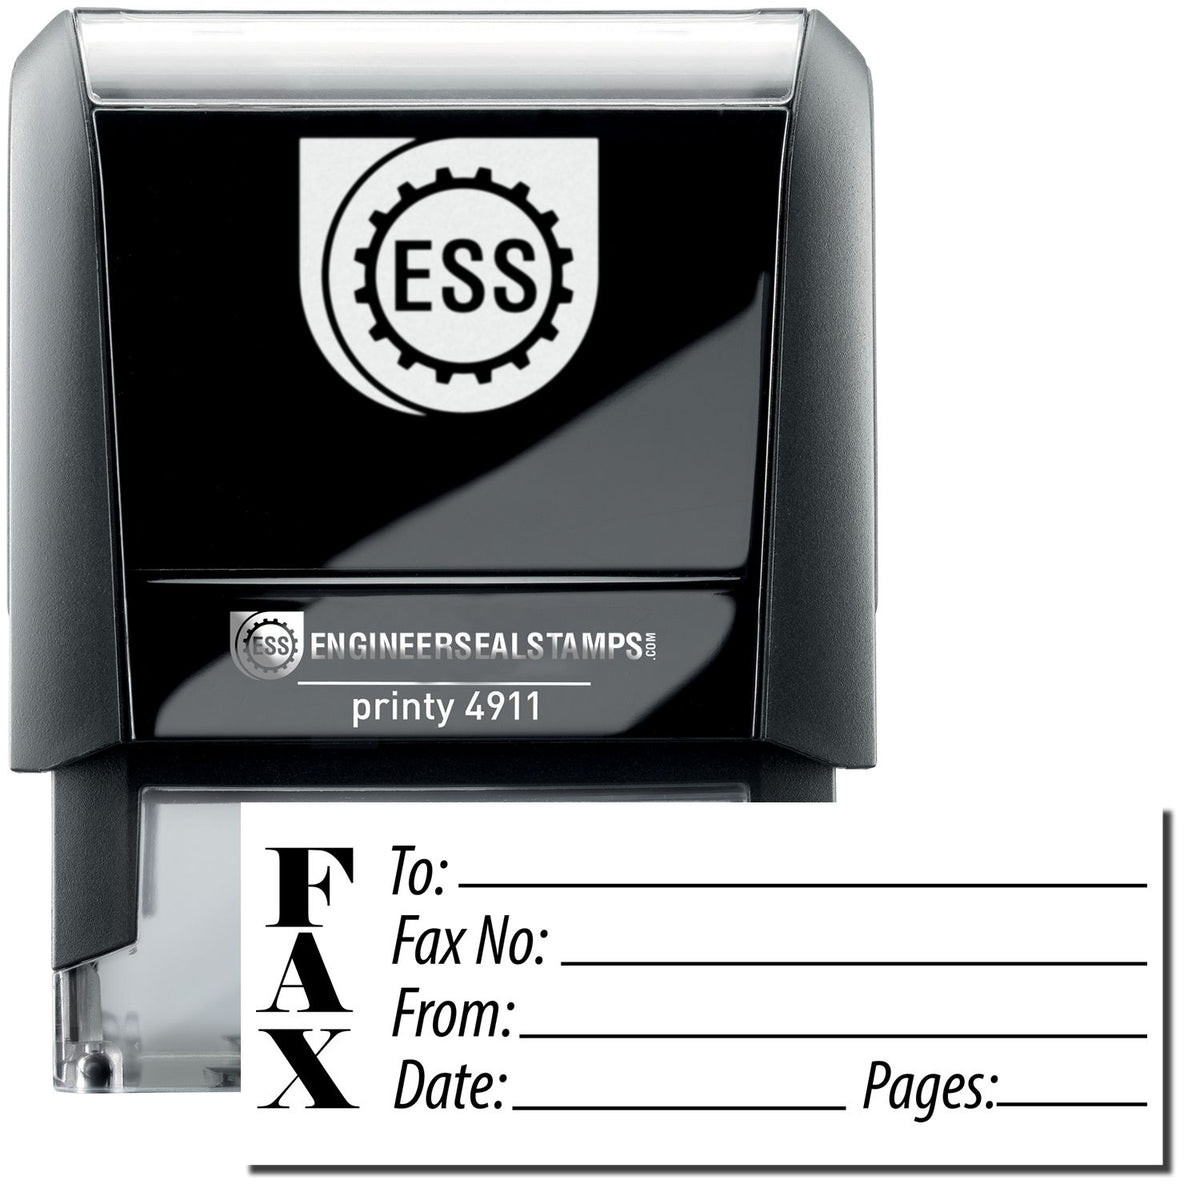 A self-inking stamp with a stamped image showing how the word &quot;FAX&quot; (while the rest of the stamp has space for a recipient&#39;s name, the fax number, who is sending the fax, when the fax is being sent, and how many pages the fax is composed of) is displayed vertically after stamping.